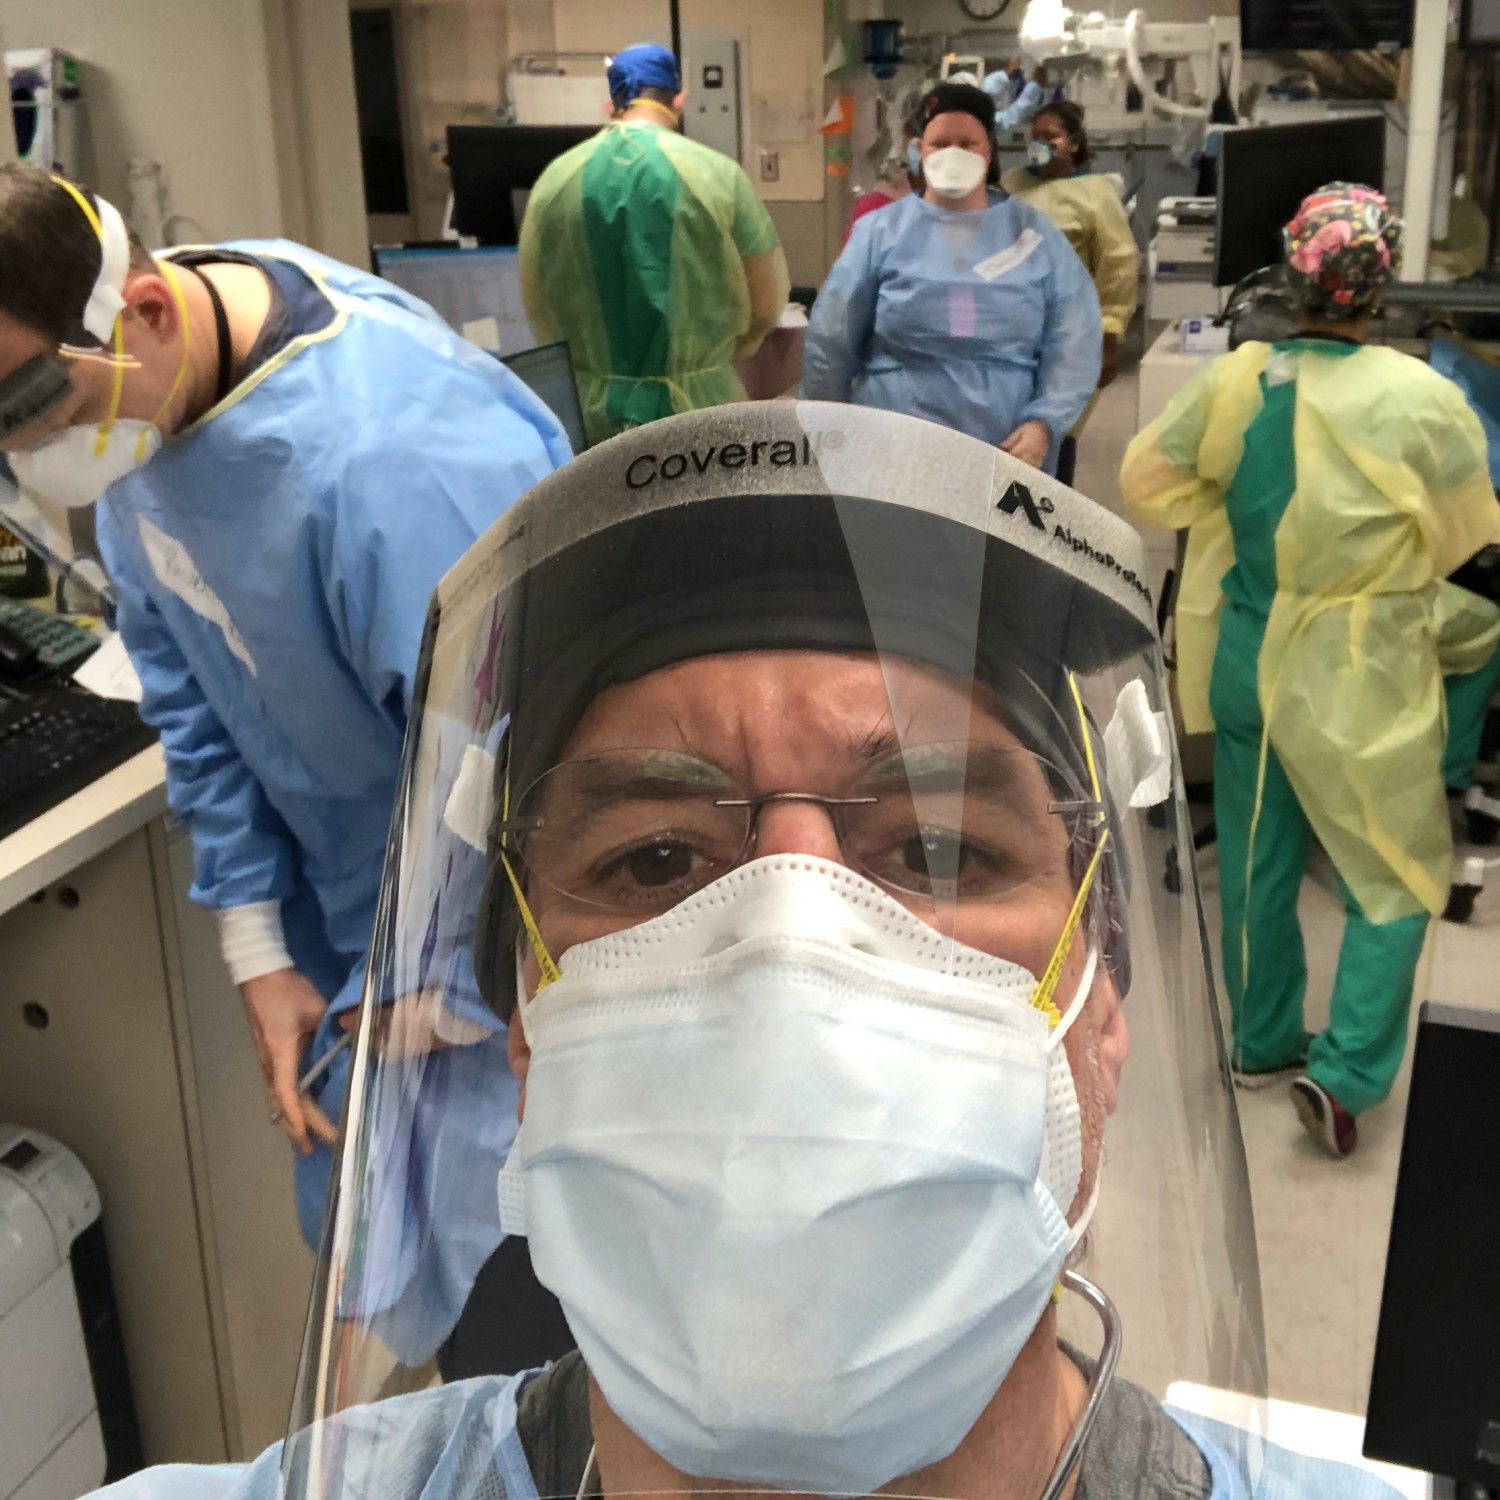 Image of David Katz, MD in full PPE gear with hospital personnel in background, also wearing full gear.